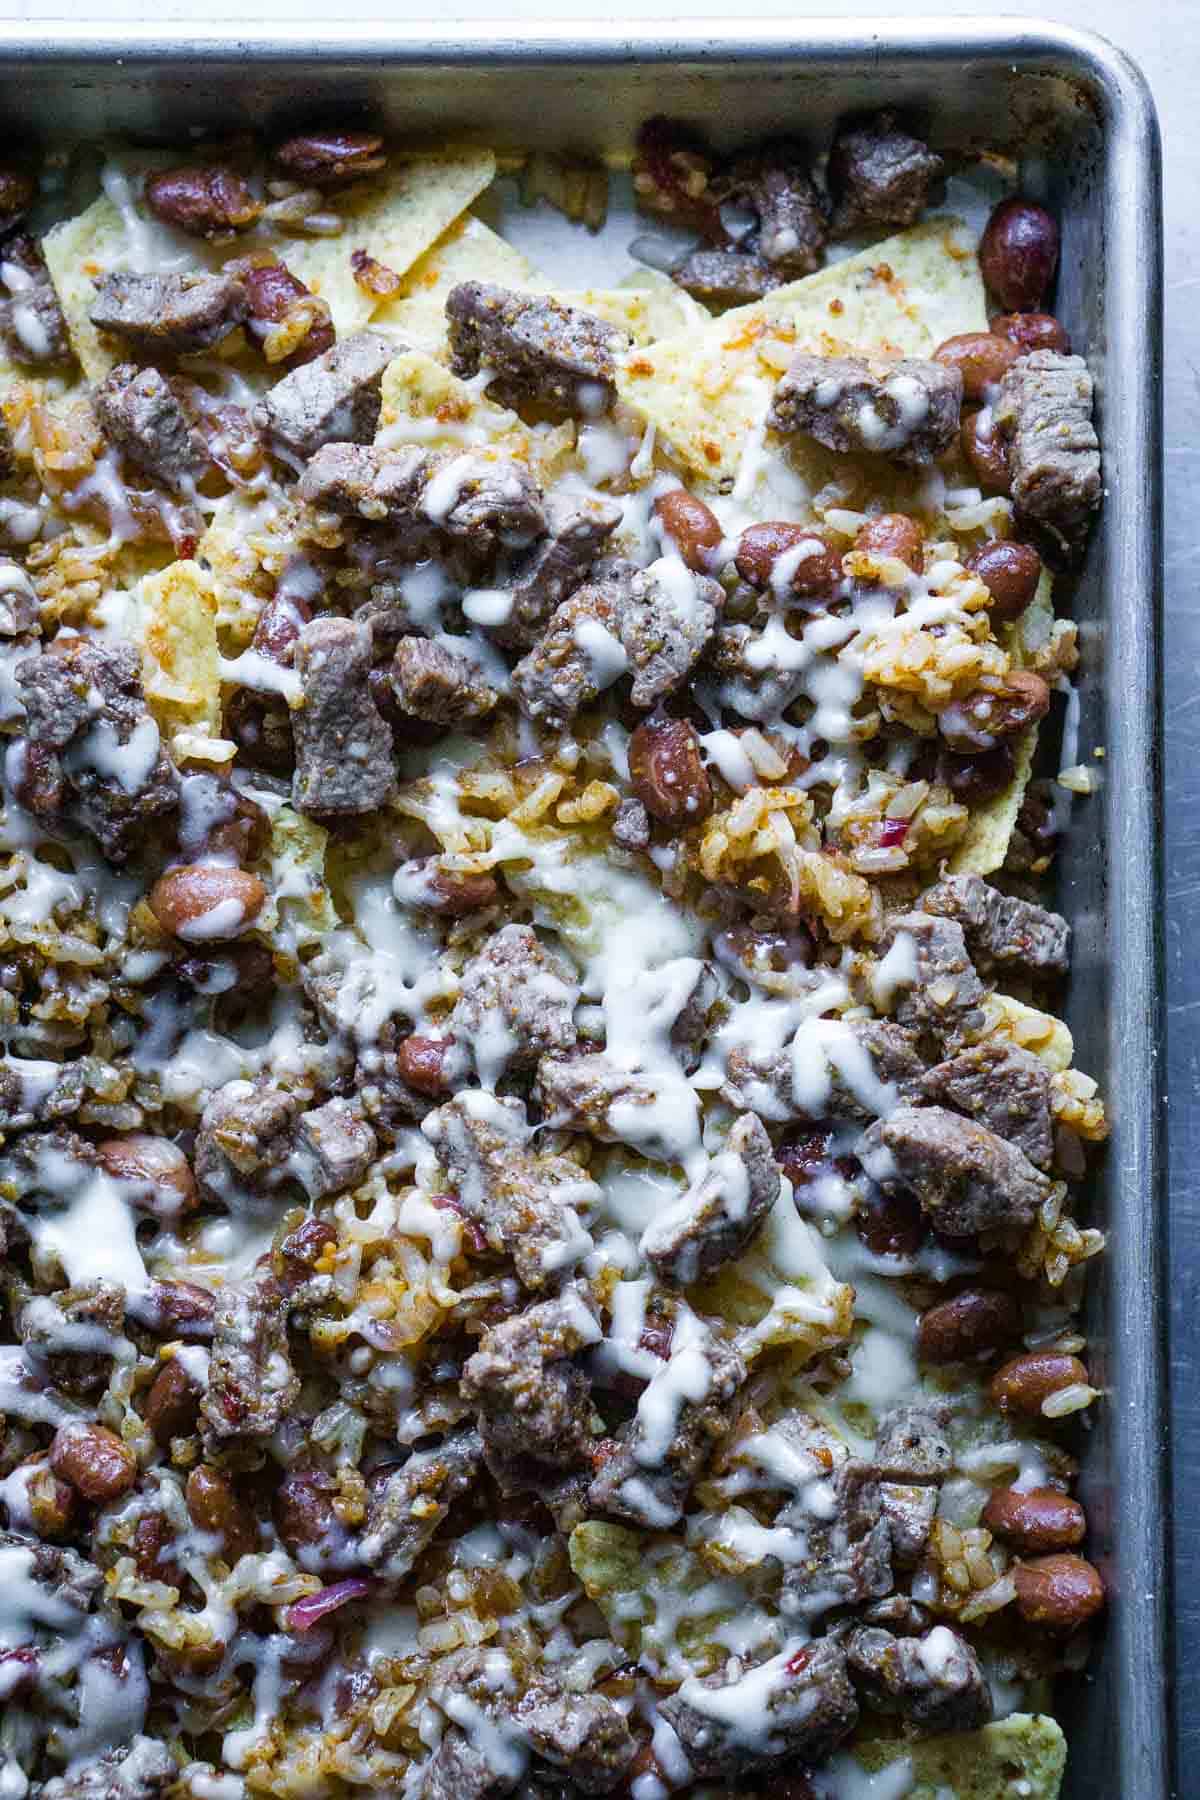 tortilla chips on baking sheet with whole pinto beans, rice, steak bites, and melted cheese